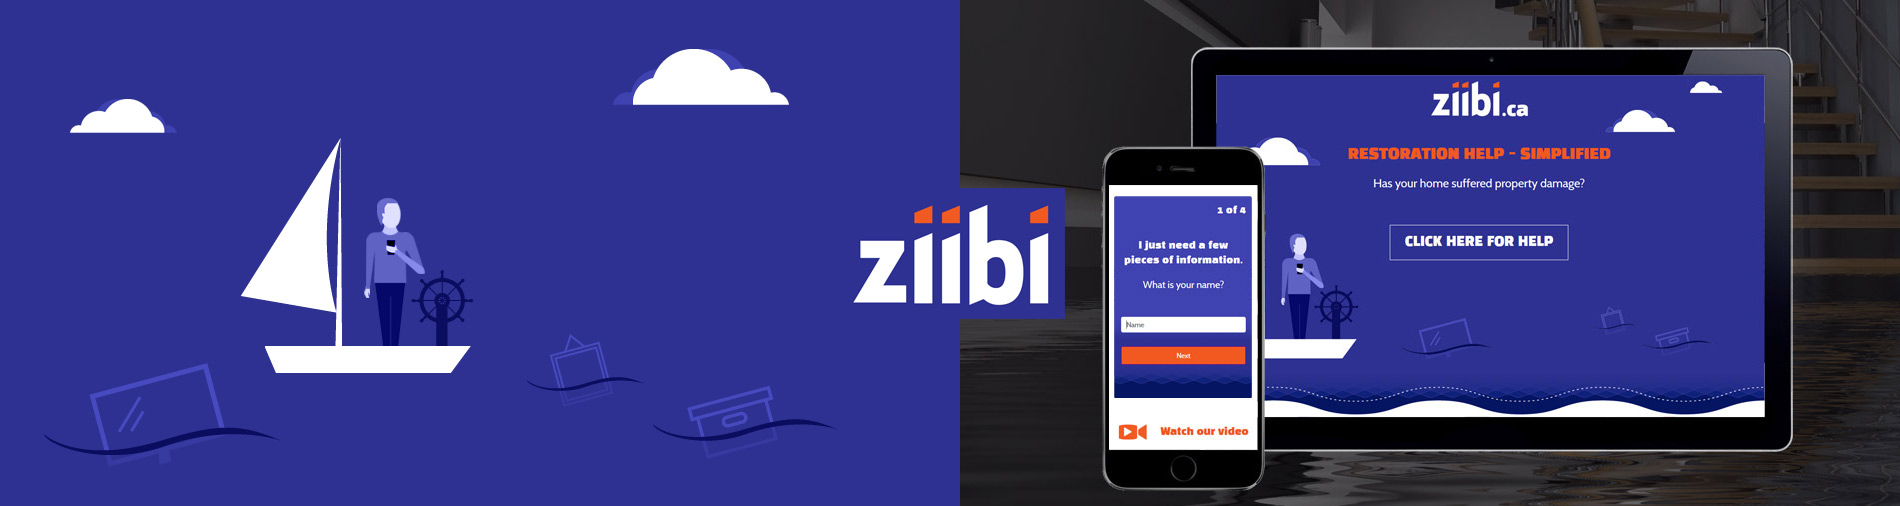 ZOO Launches AI-integrated website for Ziibi